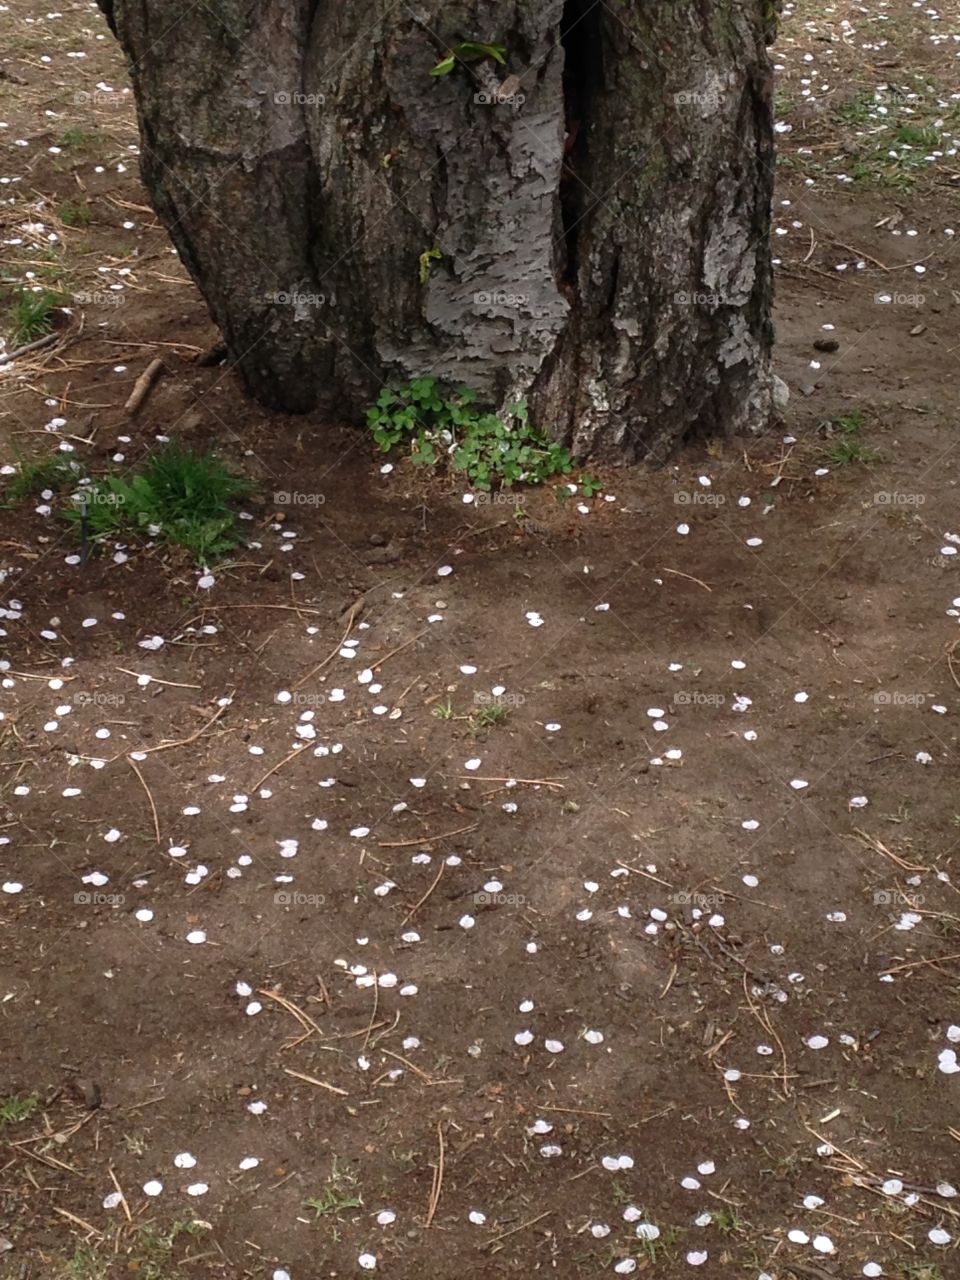 Petals from a Cherry blossom 